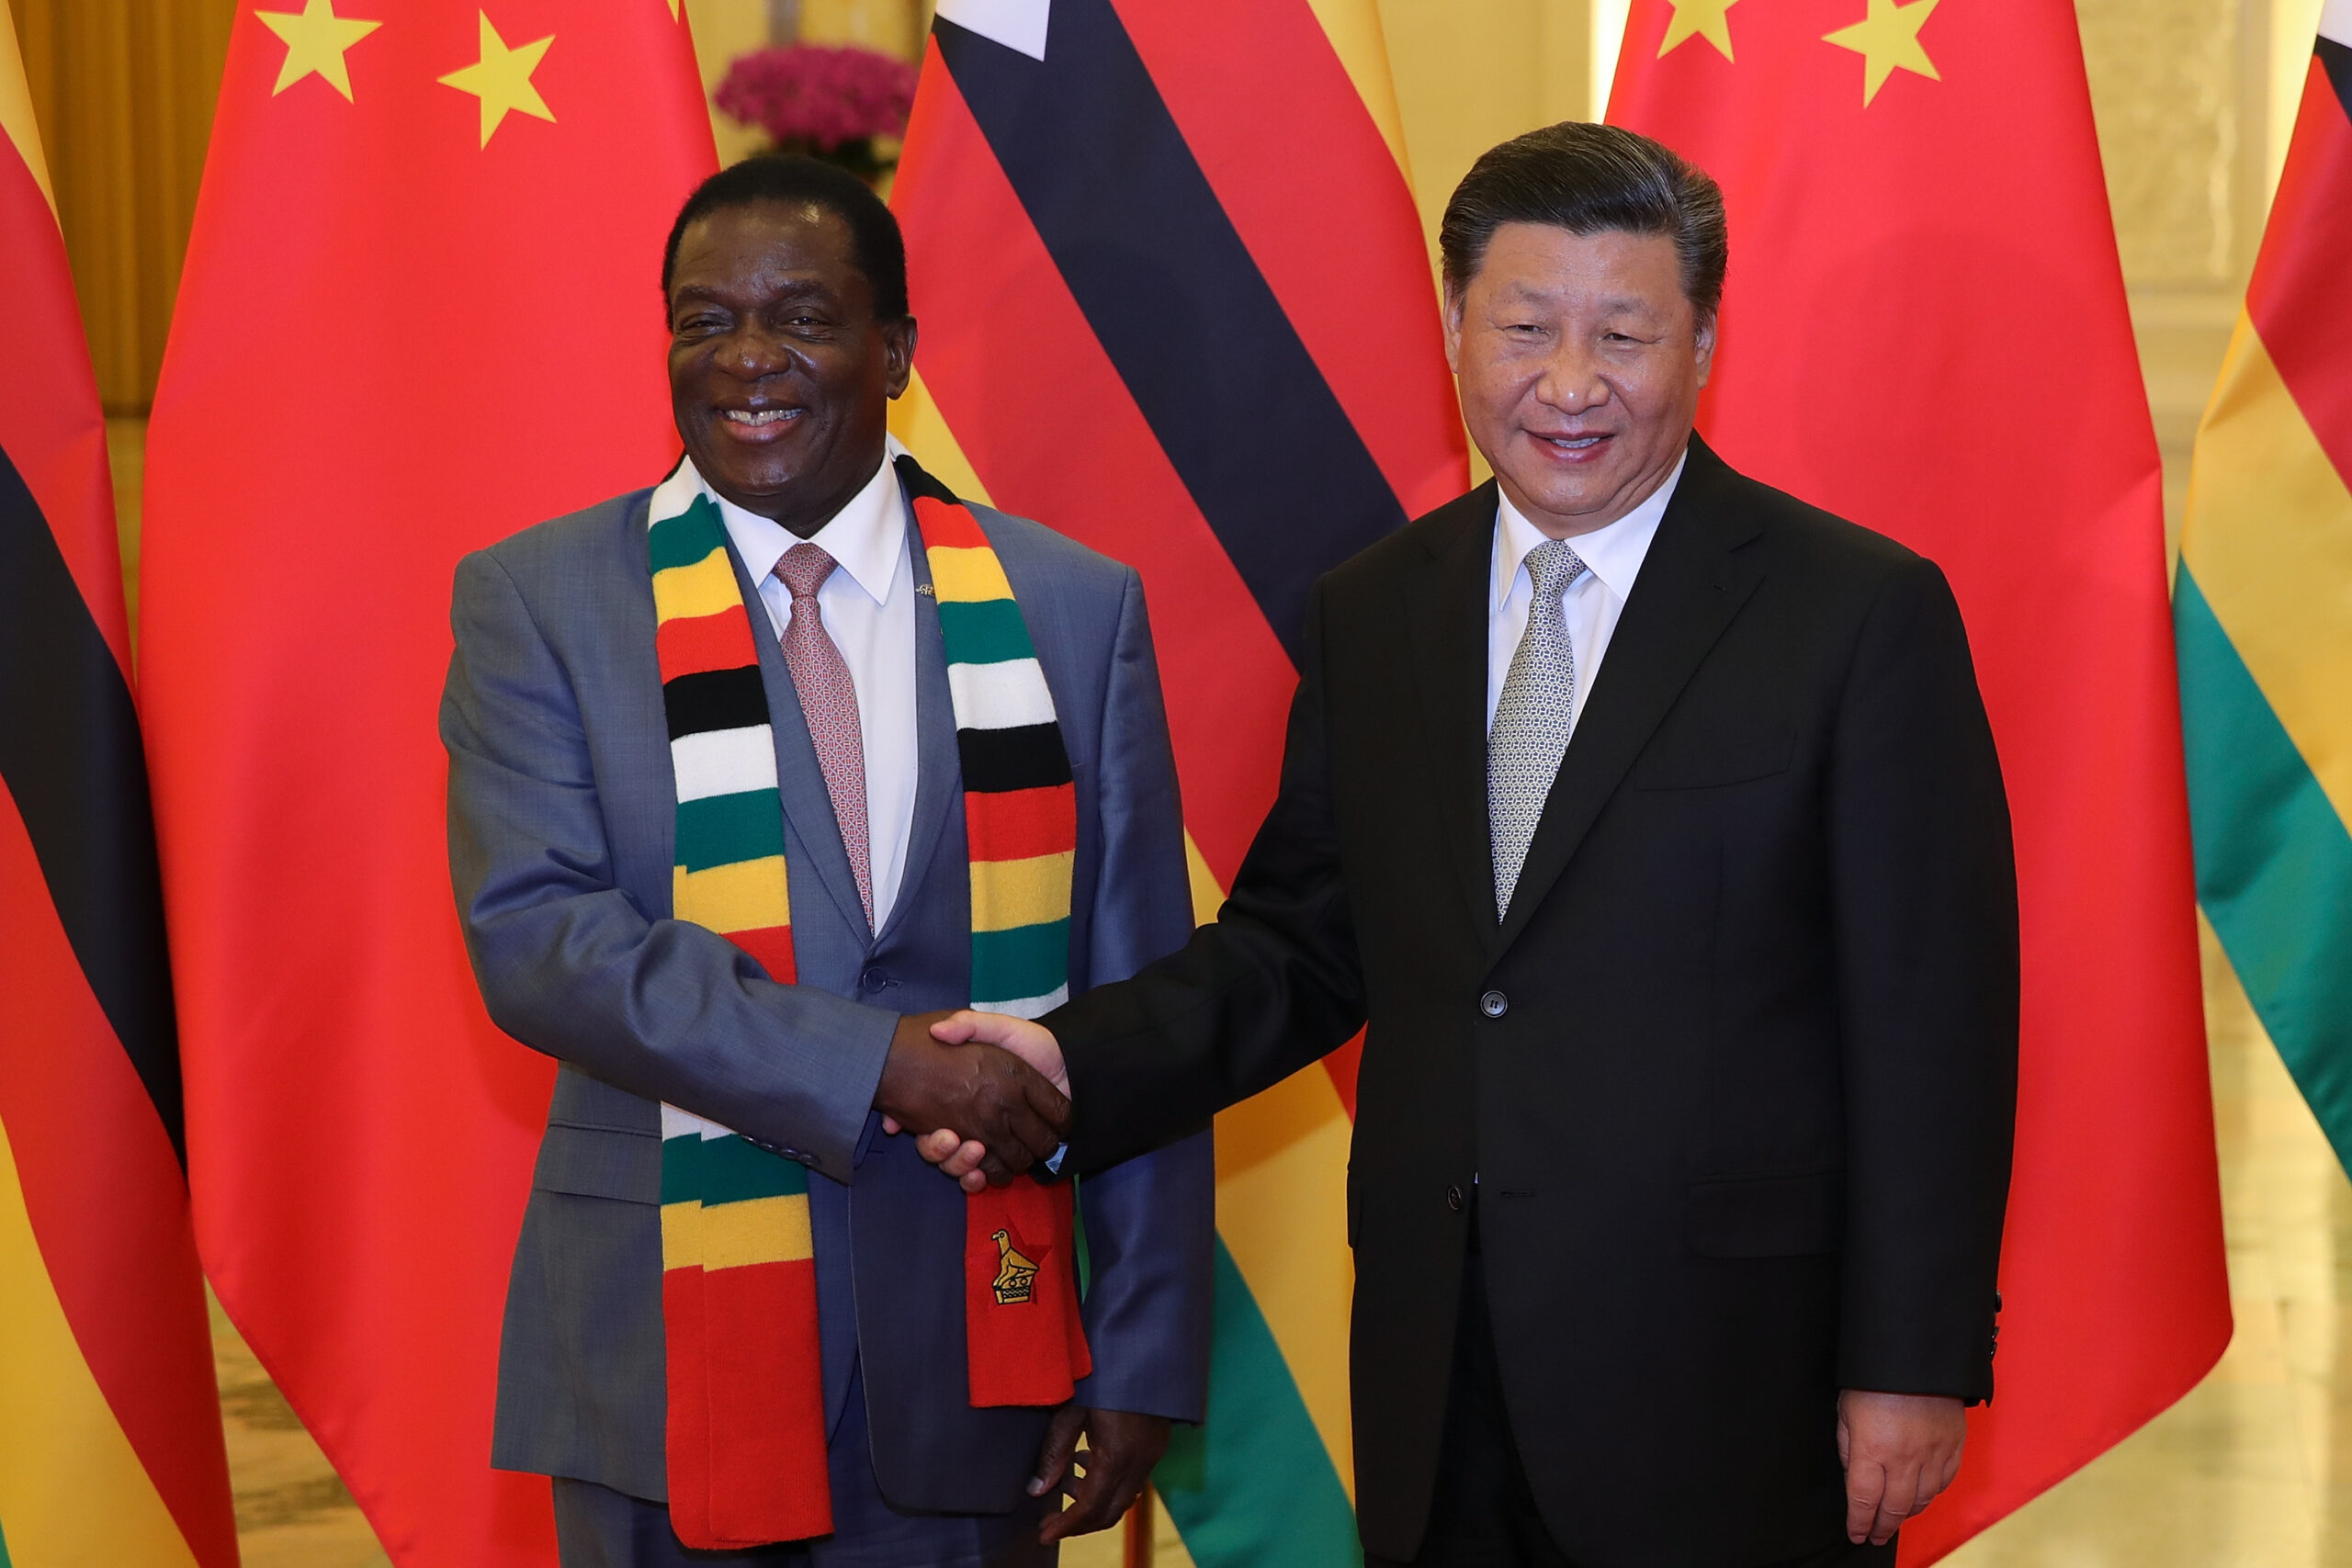 African Alliance: While Biden Pushes Electric Vehicles, China Leads The Race For Rare Earth Metals